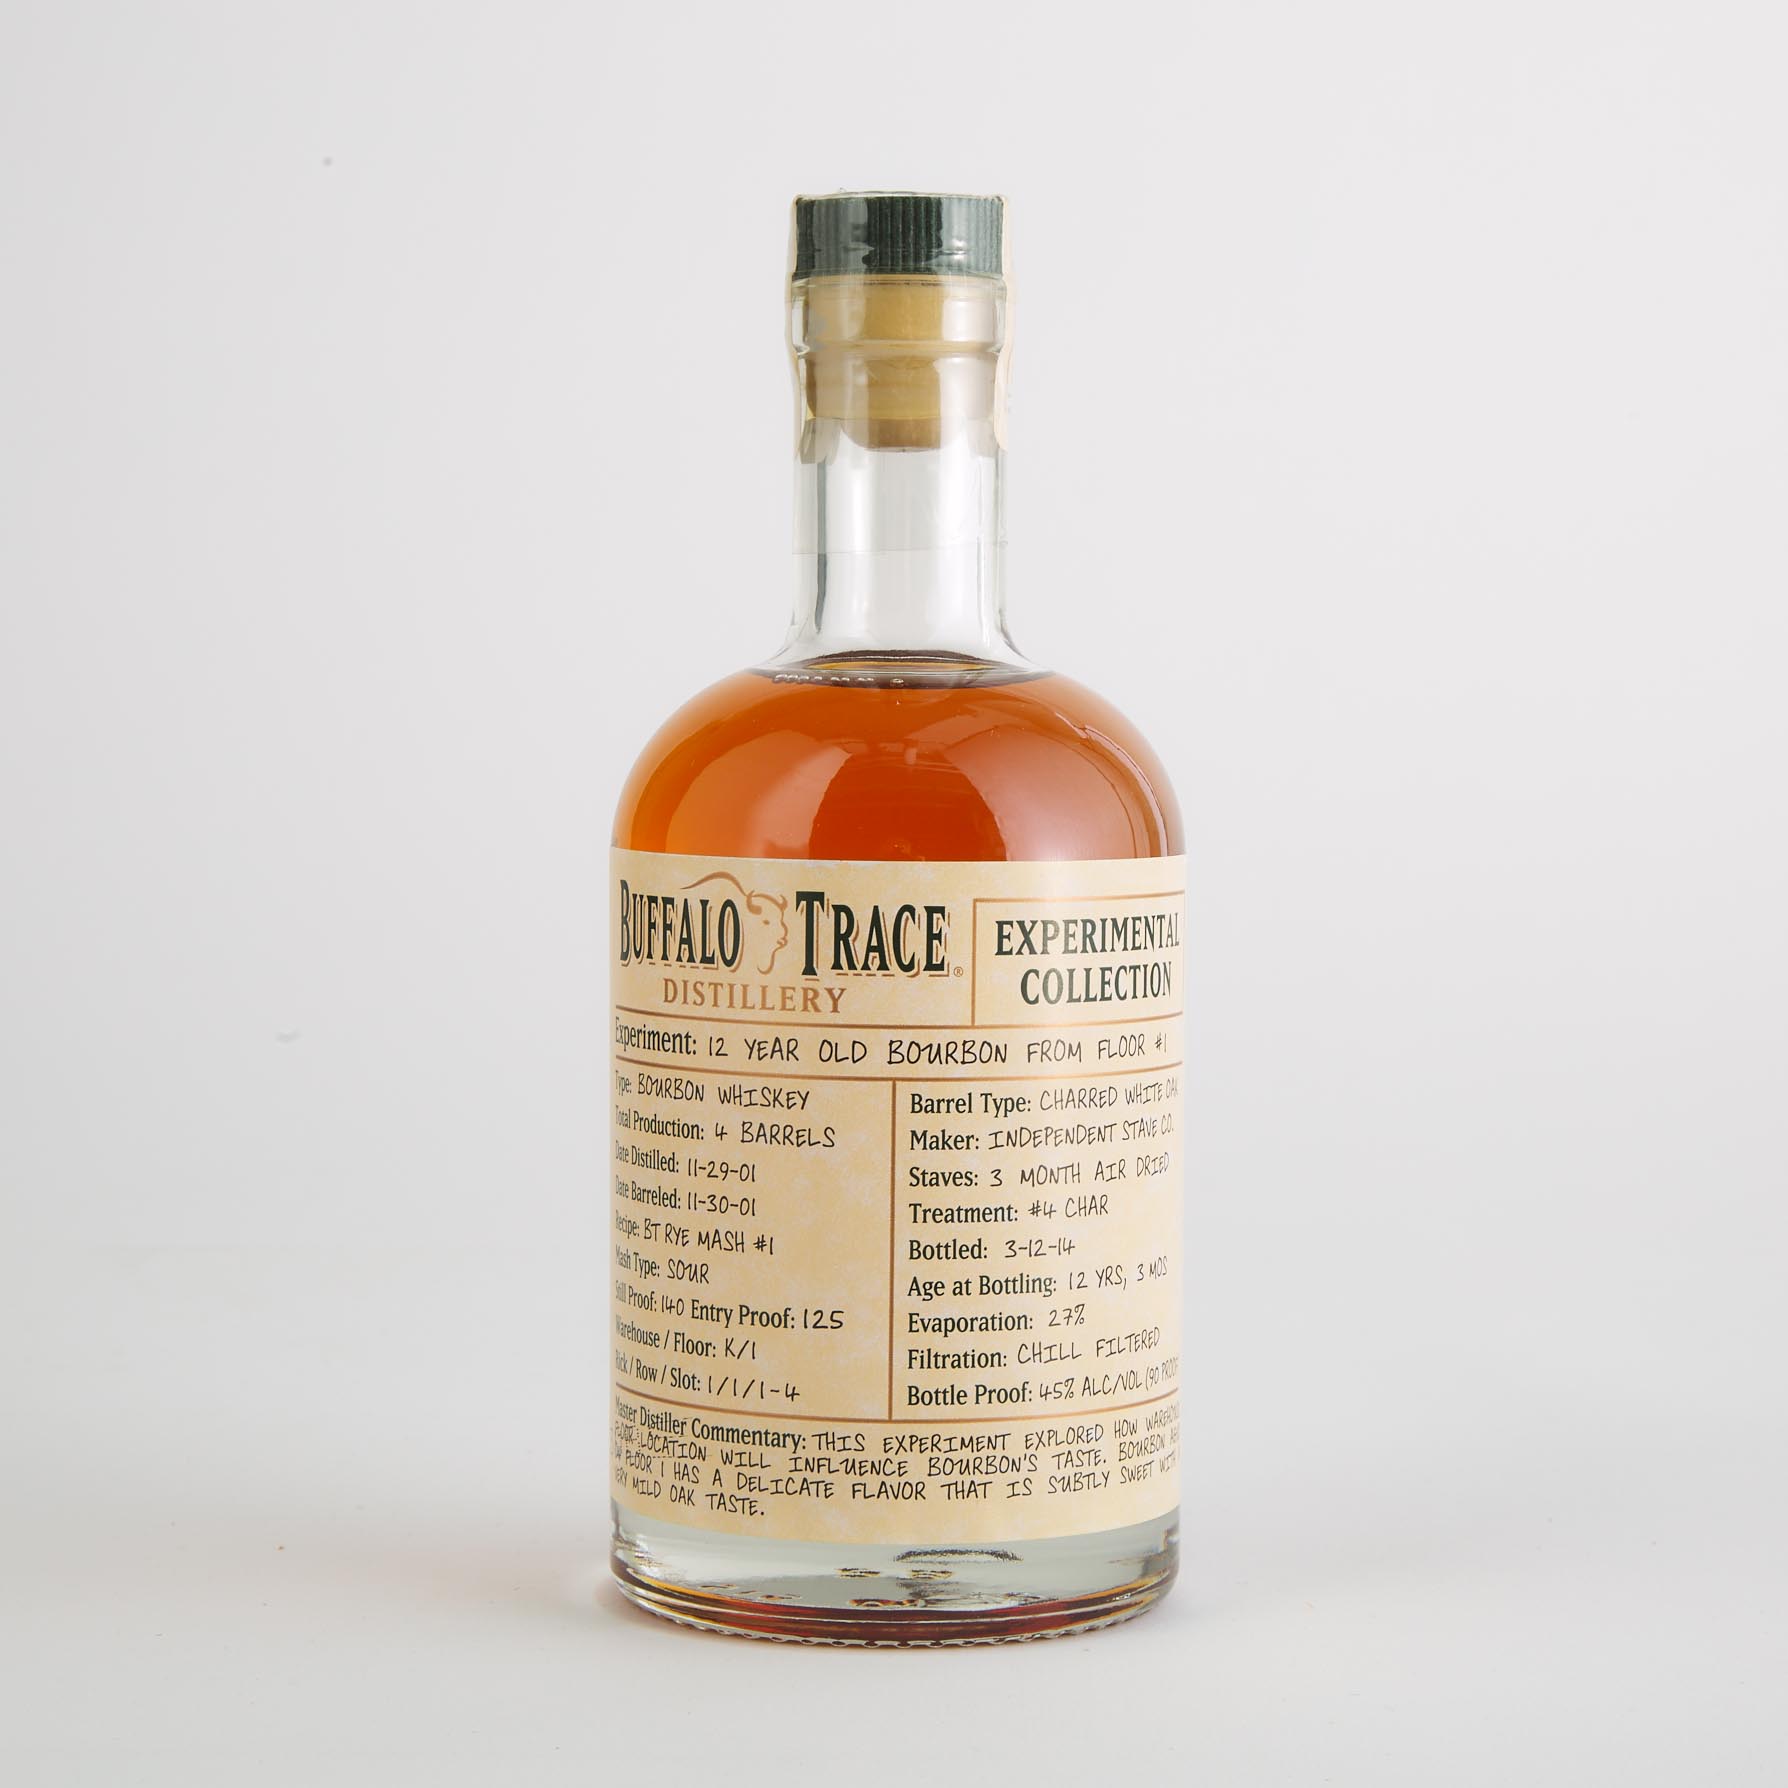 BUFFALO TRACE EXPERIMENTAL COLLECTION BOURBON 12 YEARS (ONE 375 ML)